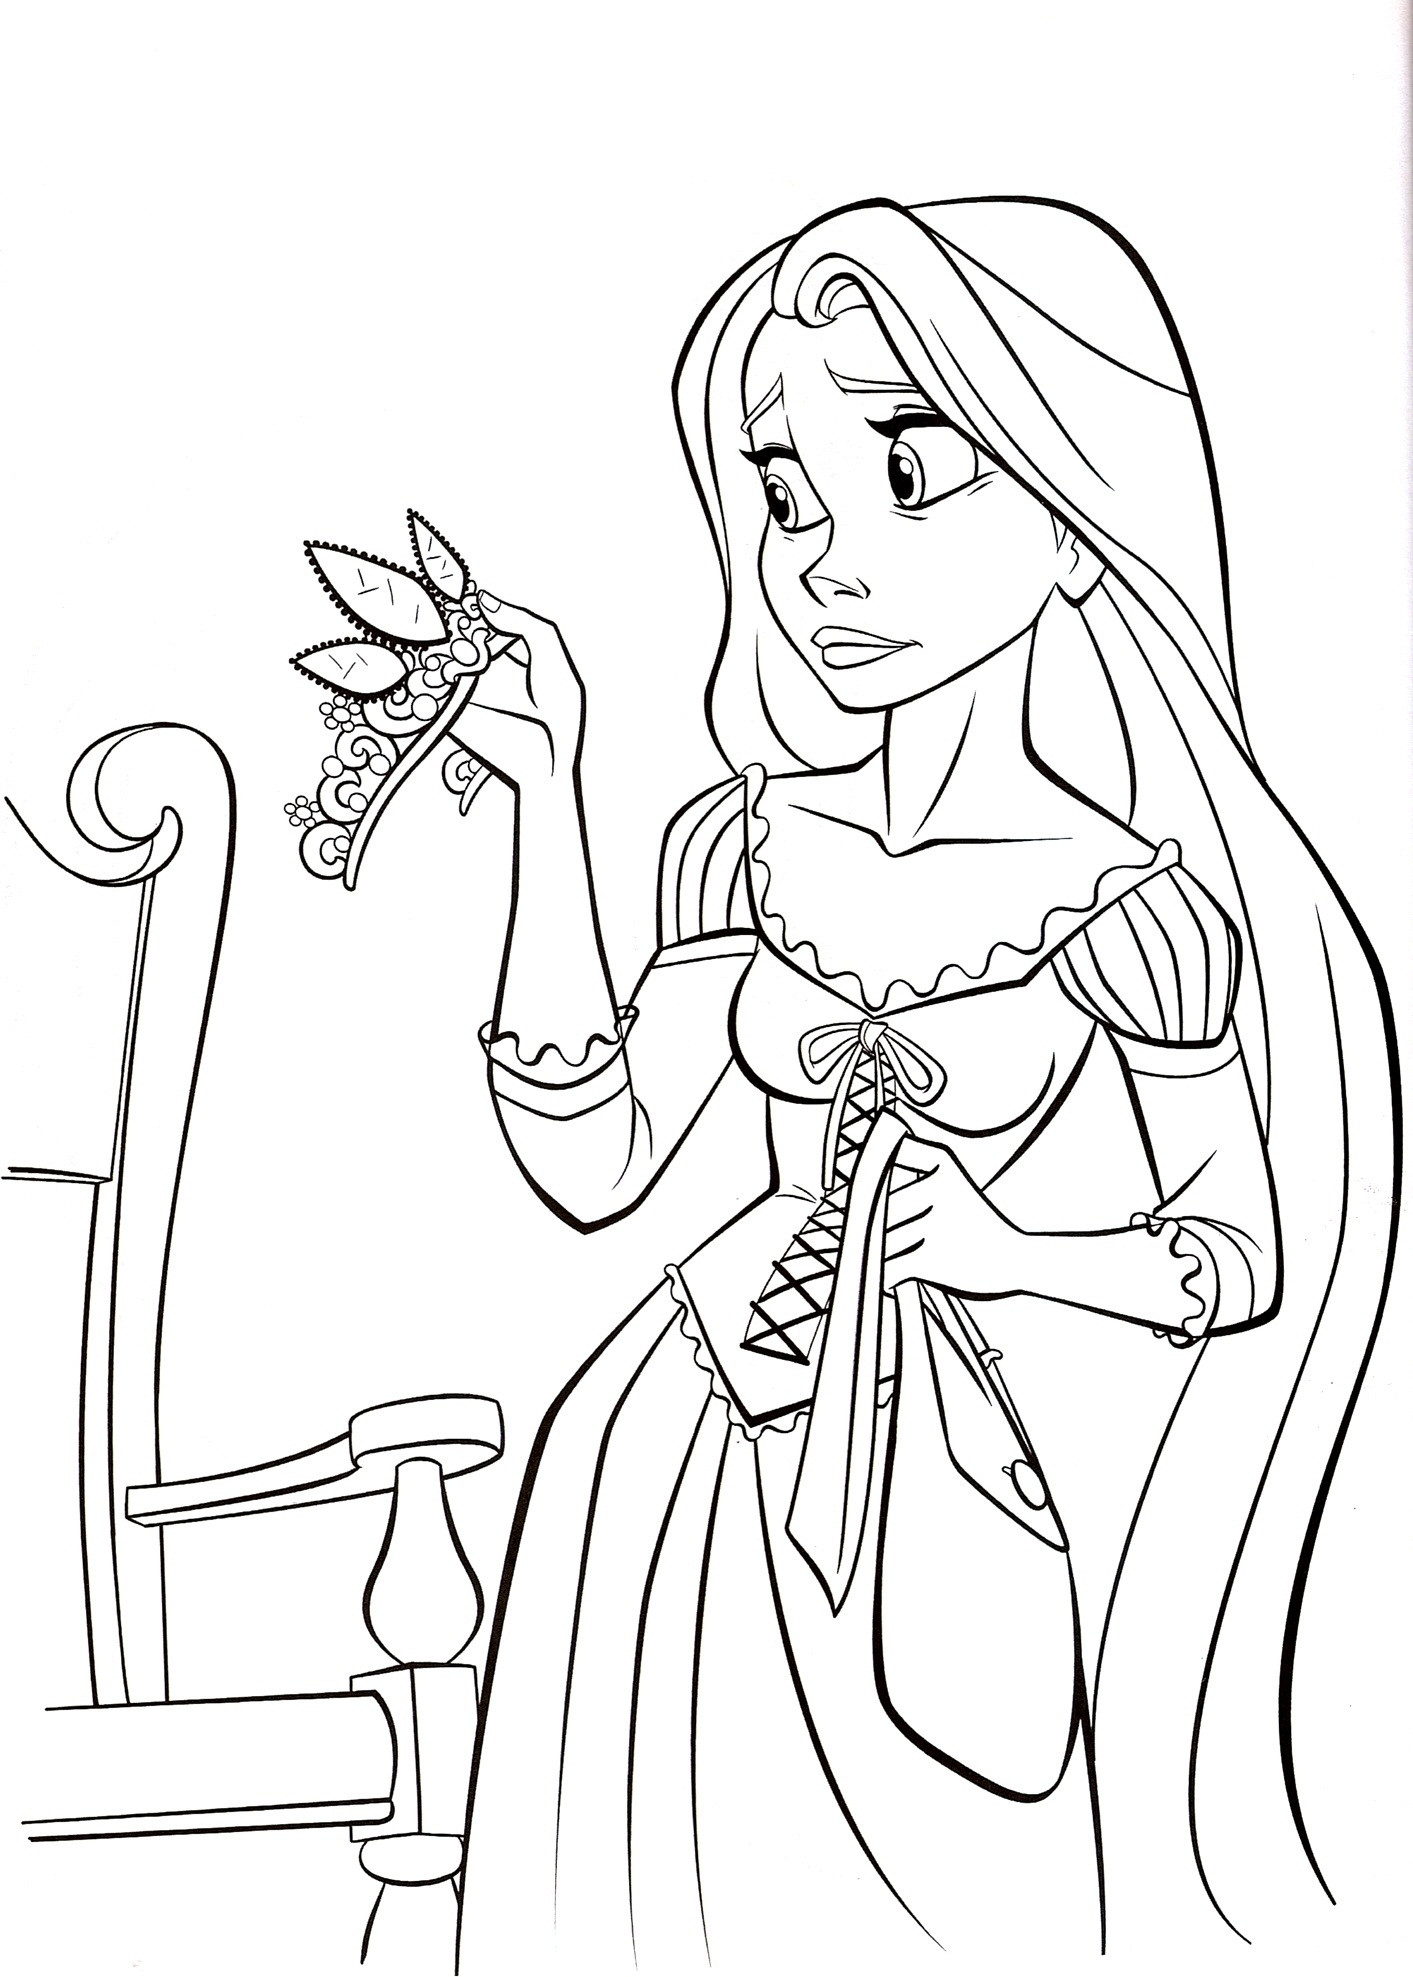 Disney Printable Coloring Pages
 Free Printable Tangled Coloring Pages For Kids